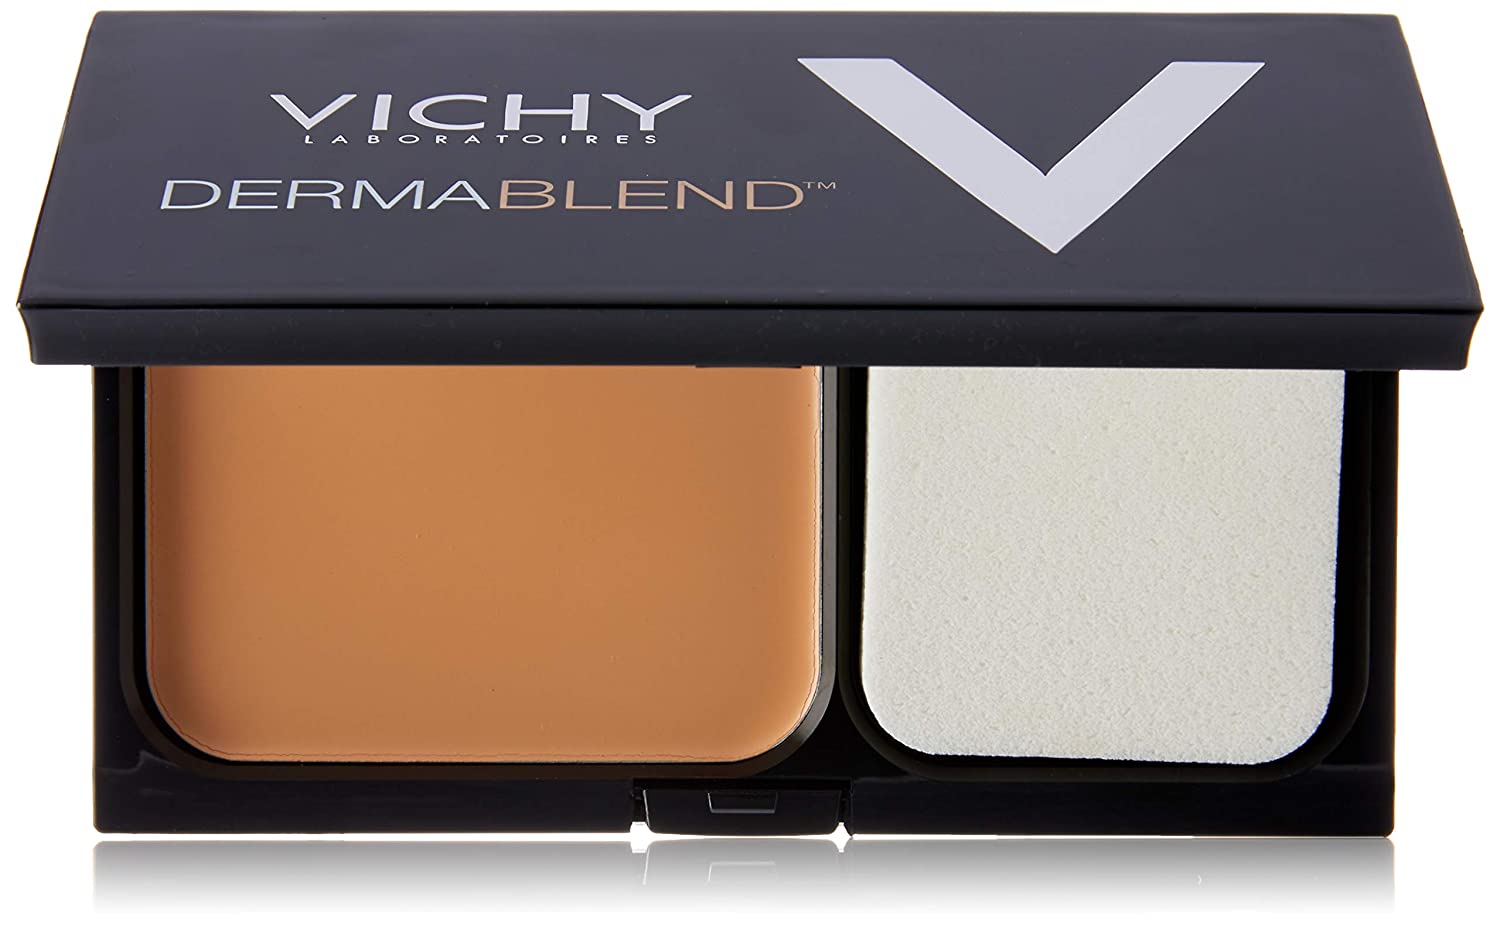 Vichy Dermablend Compact Foundation 12H SPF30 (1 Pack of 1231)